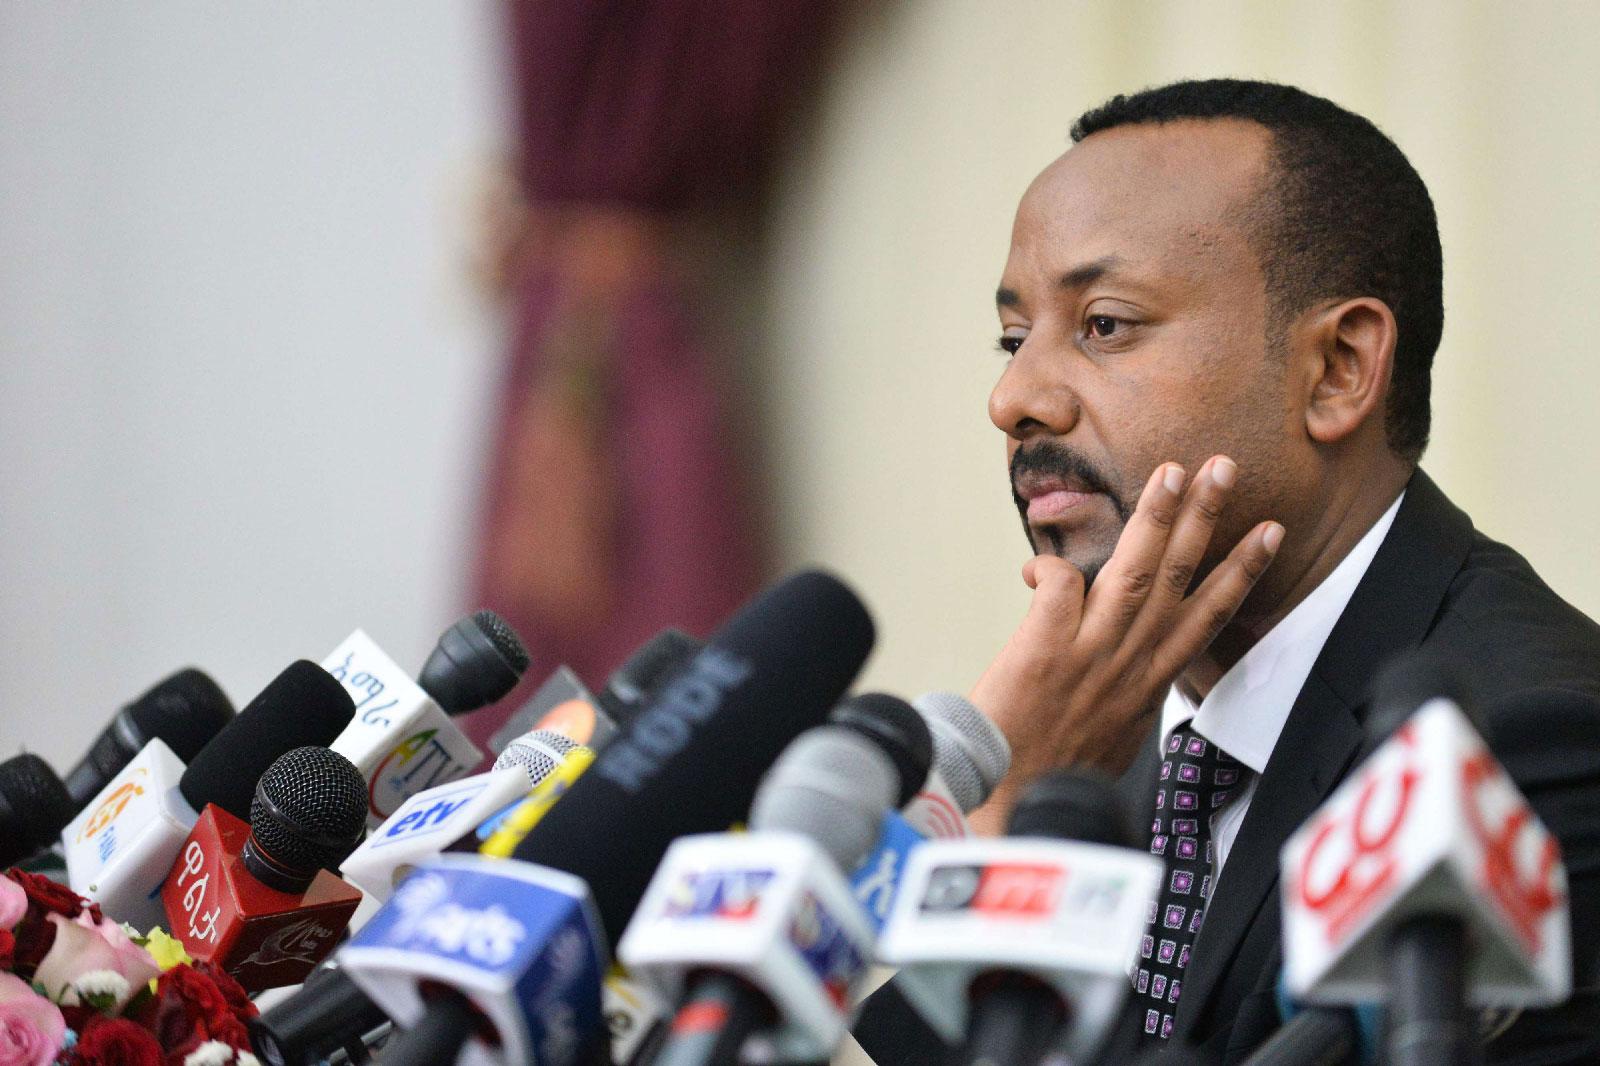 Ethiopia's Prime minister Abiy Ahmed speaks during a press conference at his office in Addis Ababa.